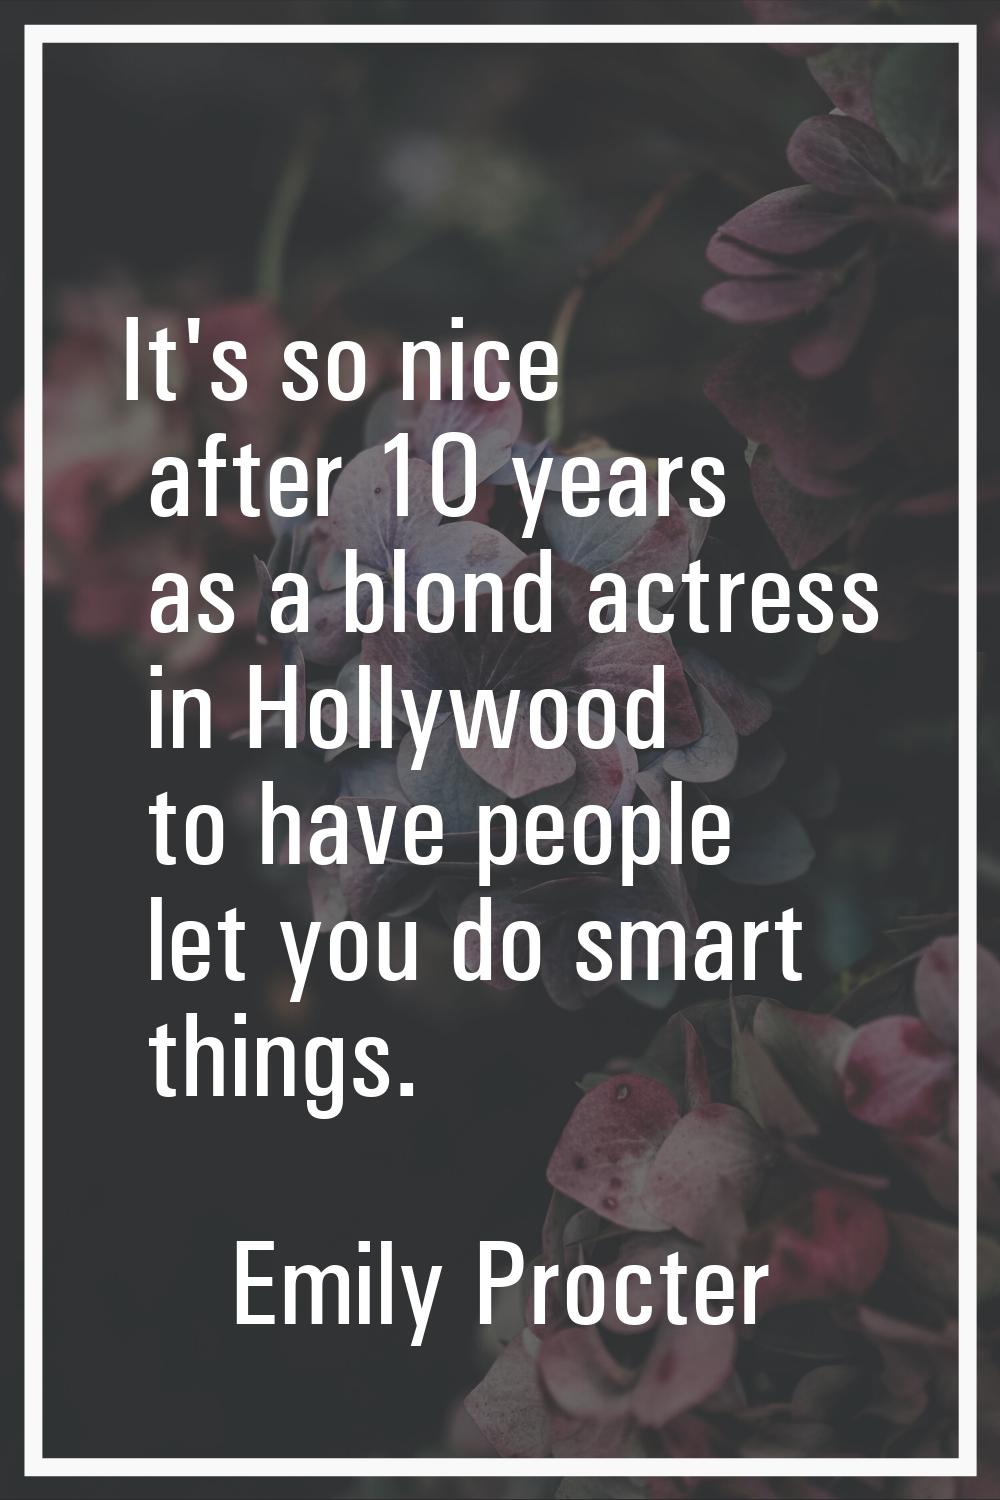 It's so nice after 10 years as a blond actress in Hollywood to have people let you do smart things.